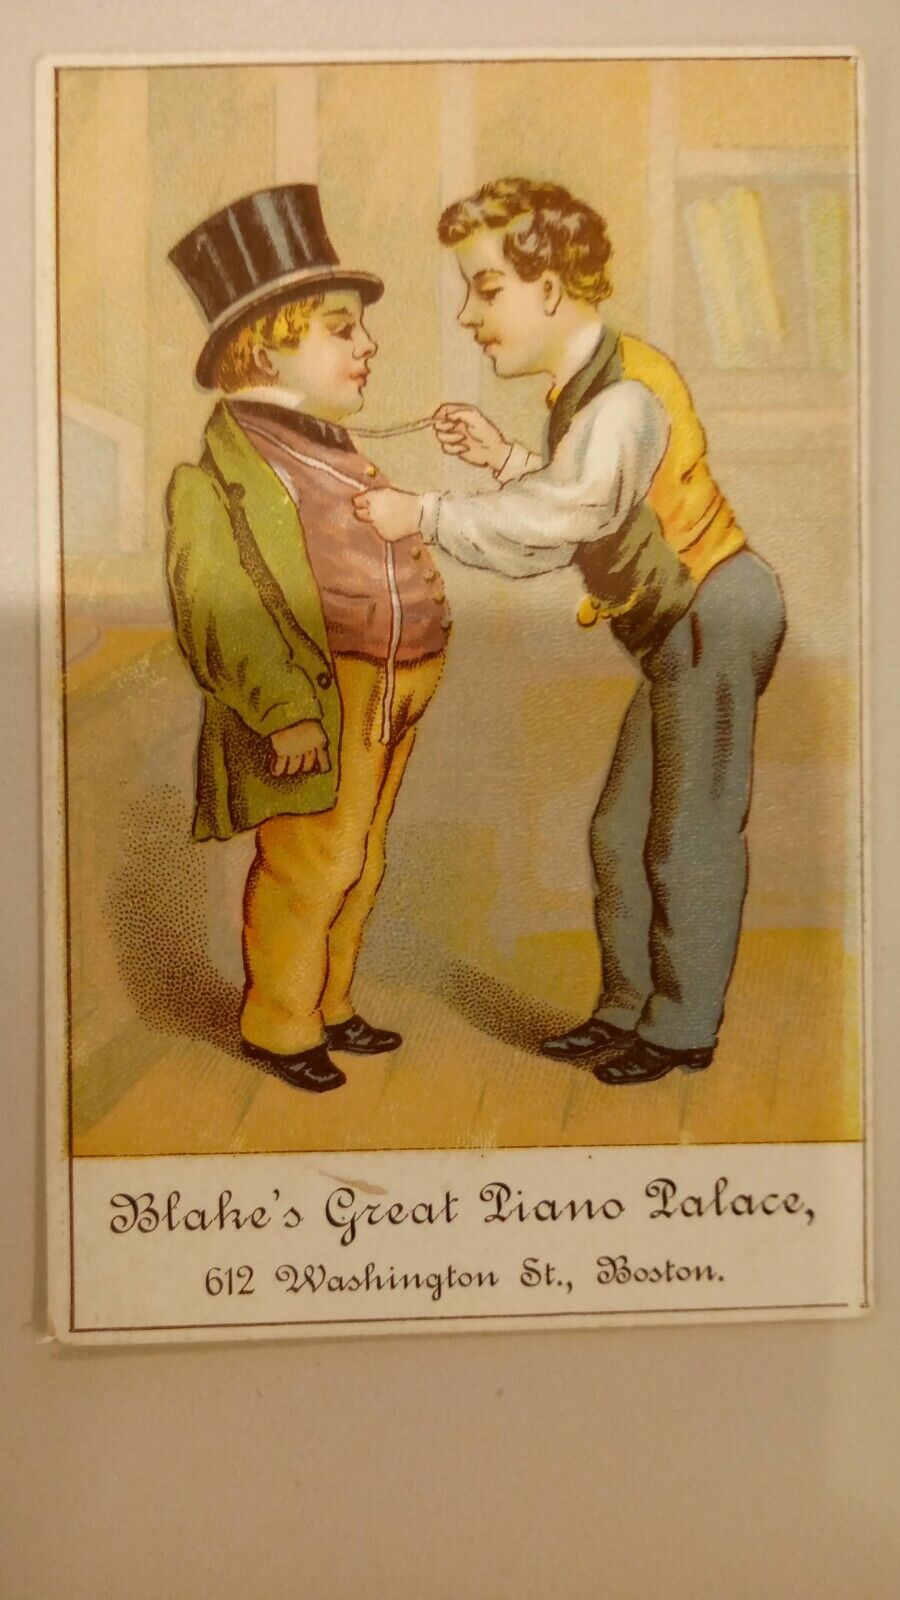 Victorian Advertising Trade Card Blakes Great Piano Palace Boston Top Hat 1880's